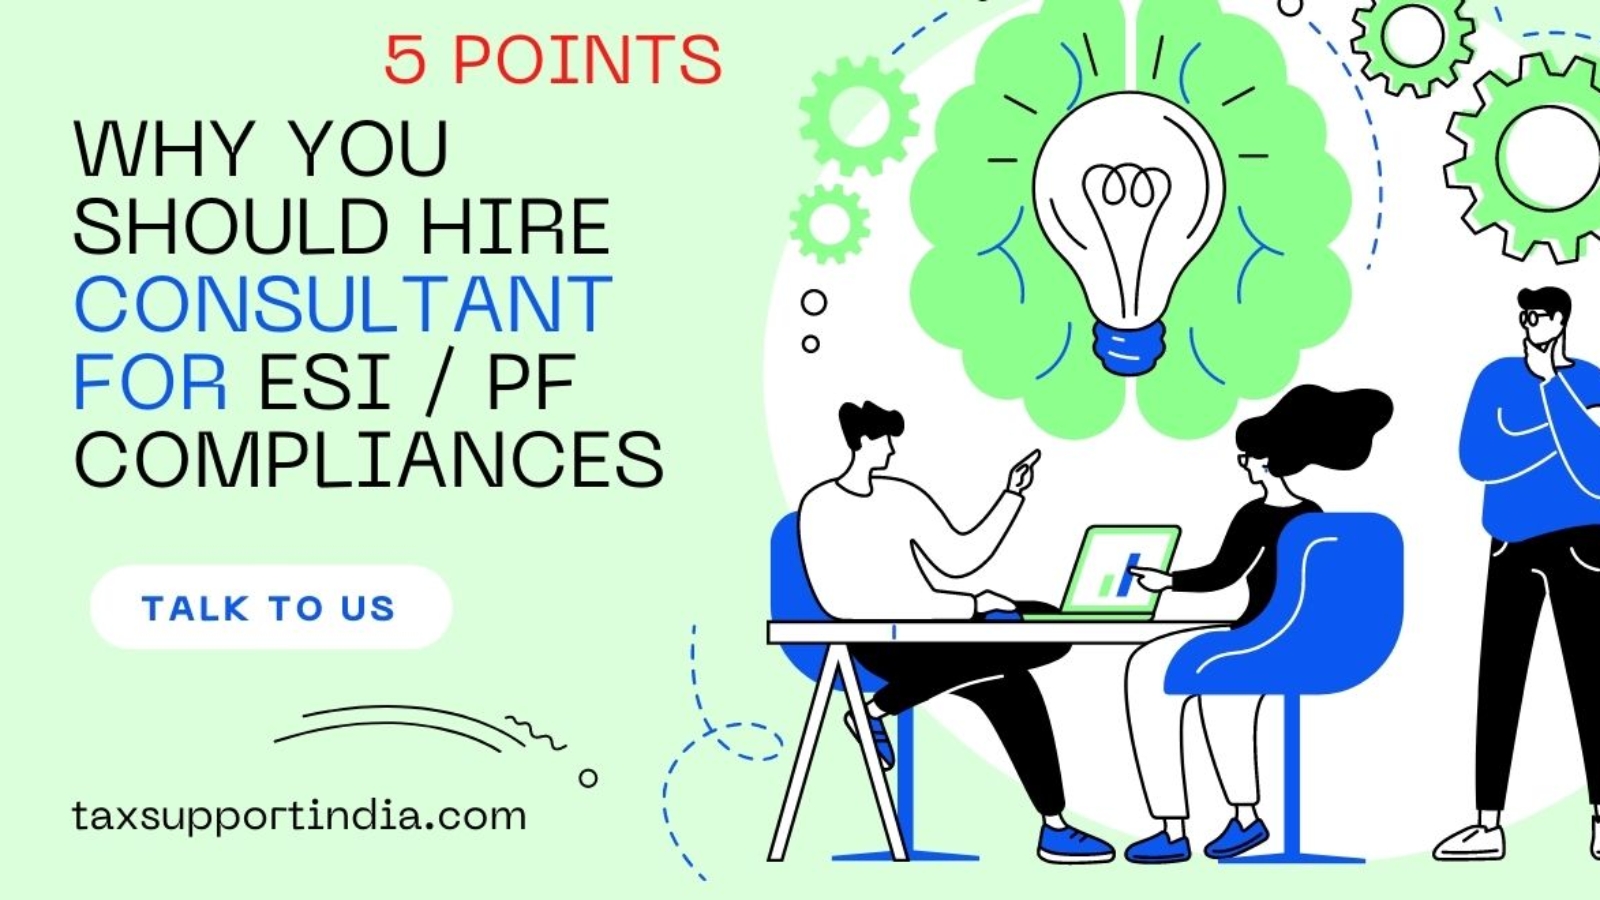 5 POINTS - WHY YOU SHOULD HIRE ESI and PF CONSULTANT in Greater Noida, Ghaziabad, Delhi, Indore, Saharanpur, J & K, Kashmir